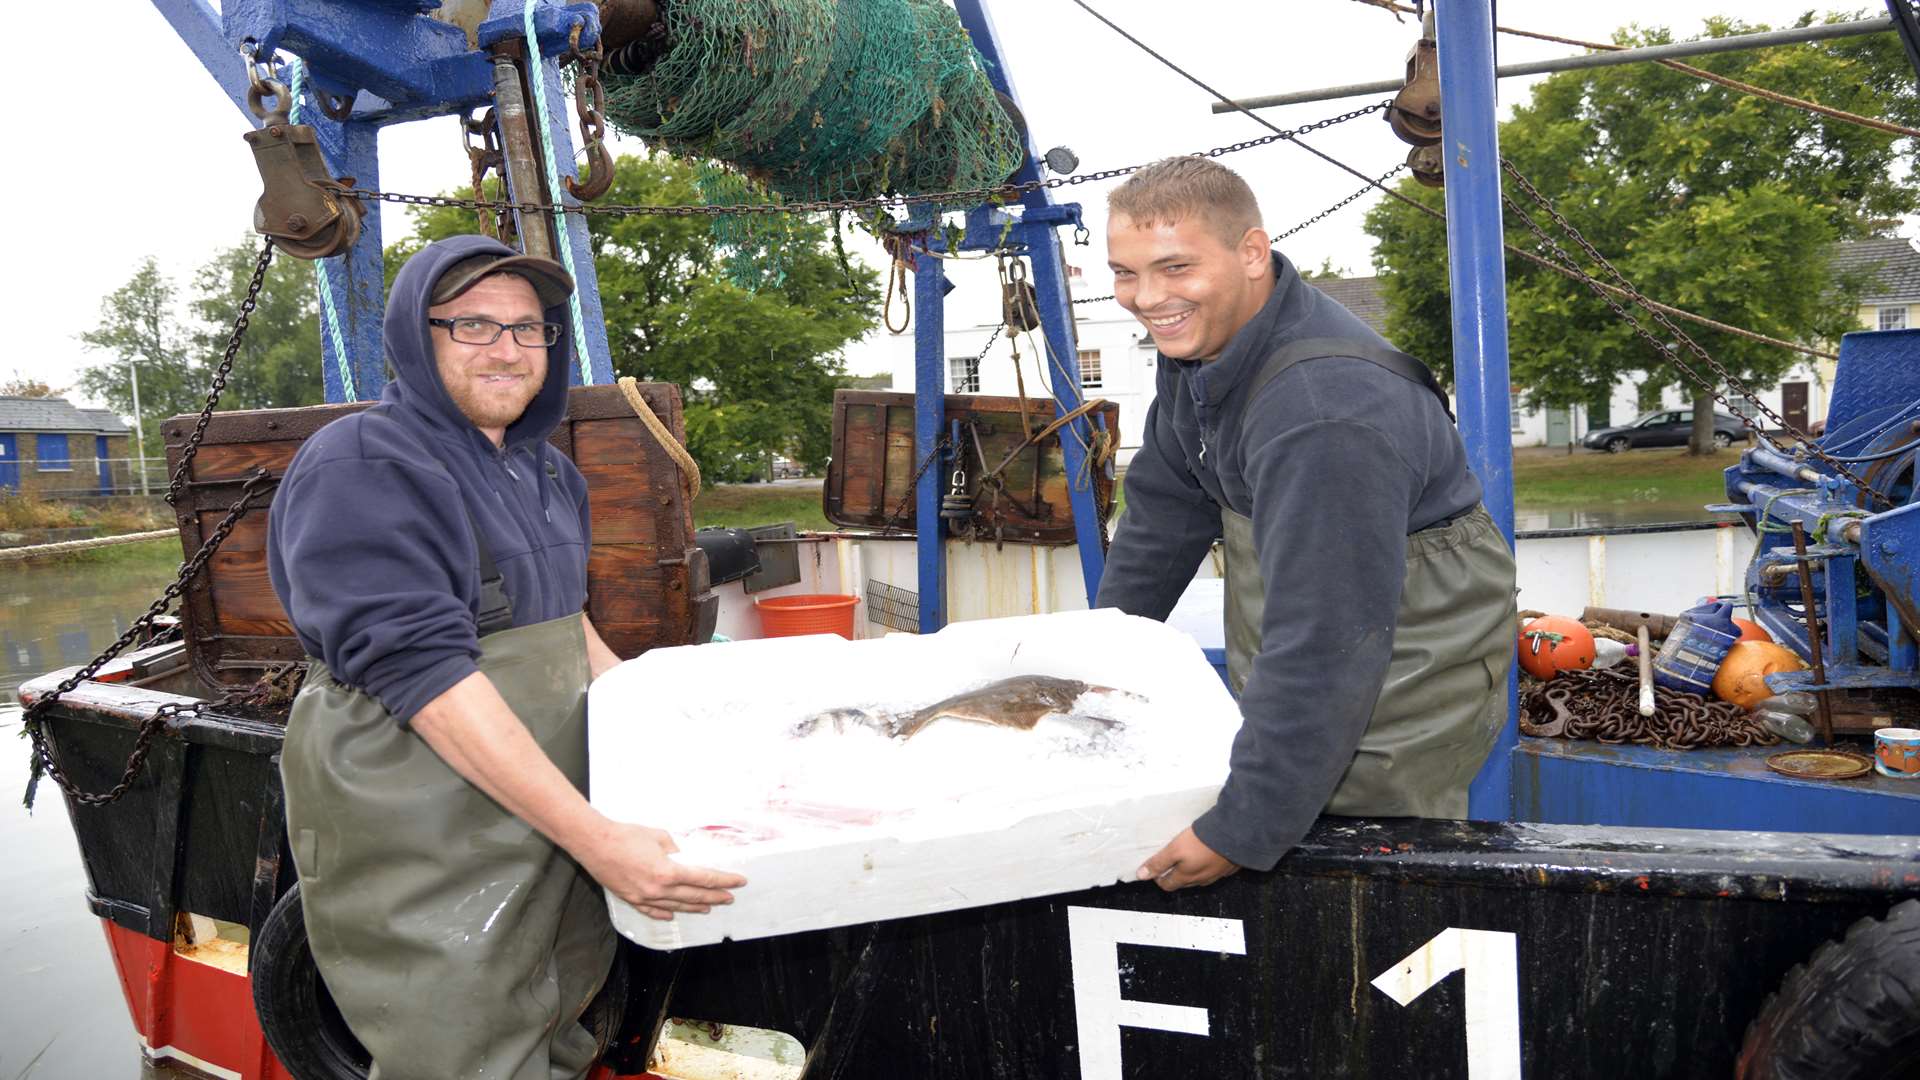 The landing of the fish launches the Faversham Food Festival Picture: Ruth Cuerden